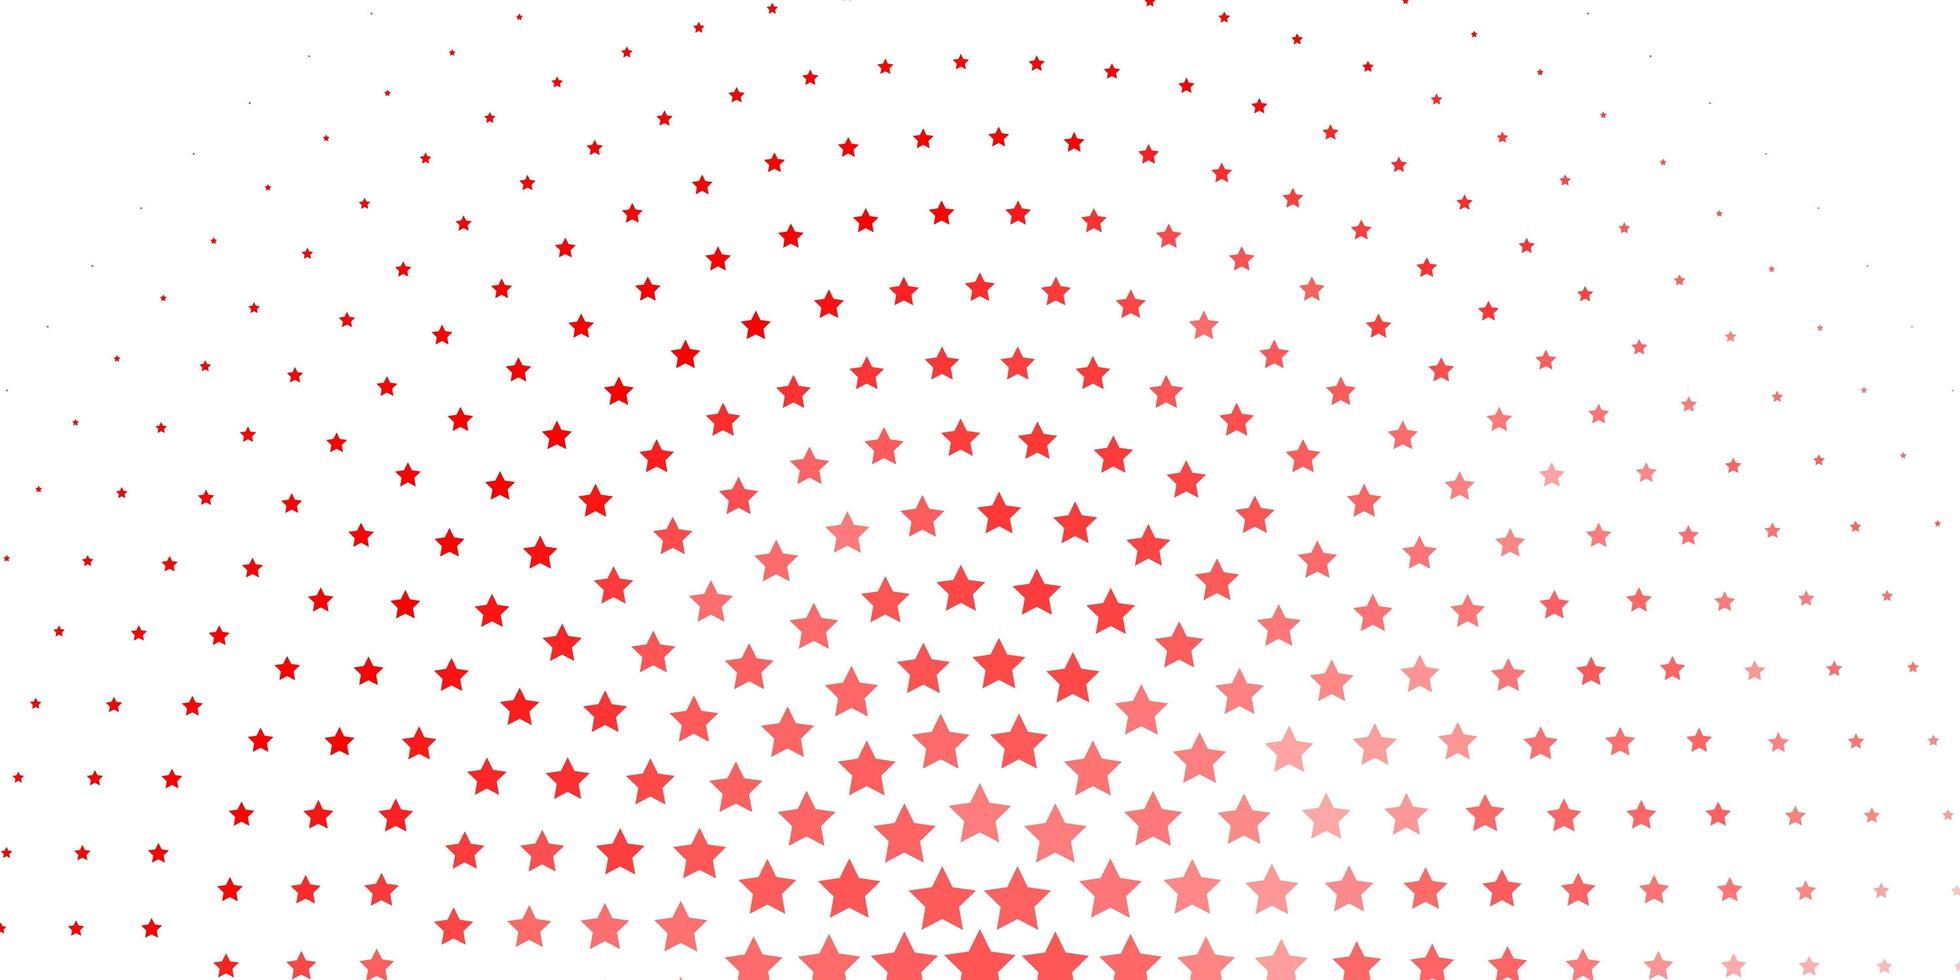 Light Red vector background with small and big stars Blur decorative design in simple style with stars Design for your business promotion